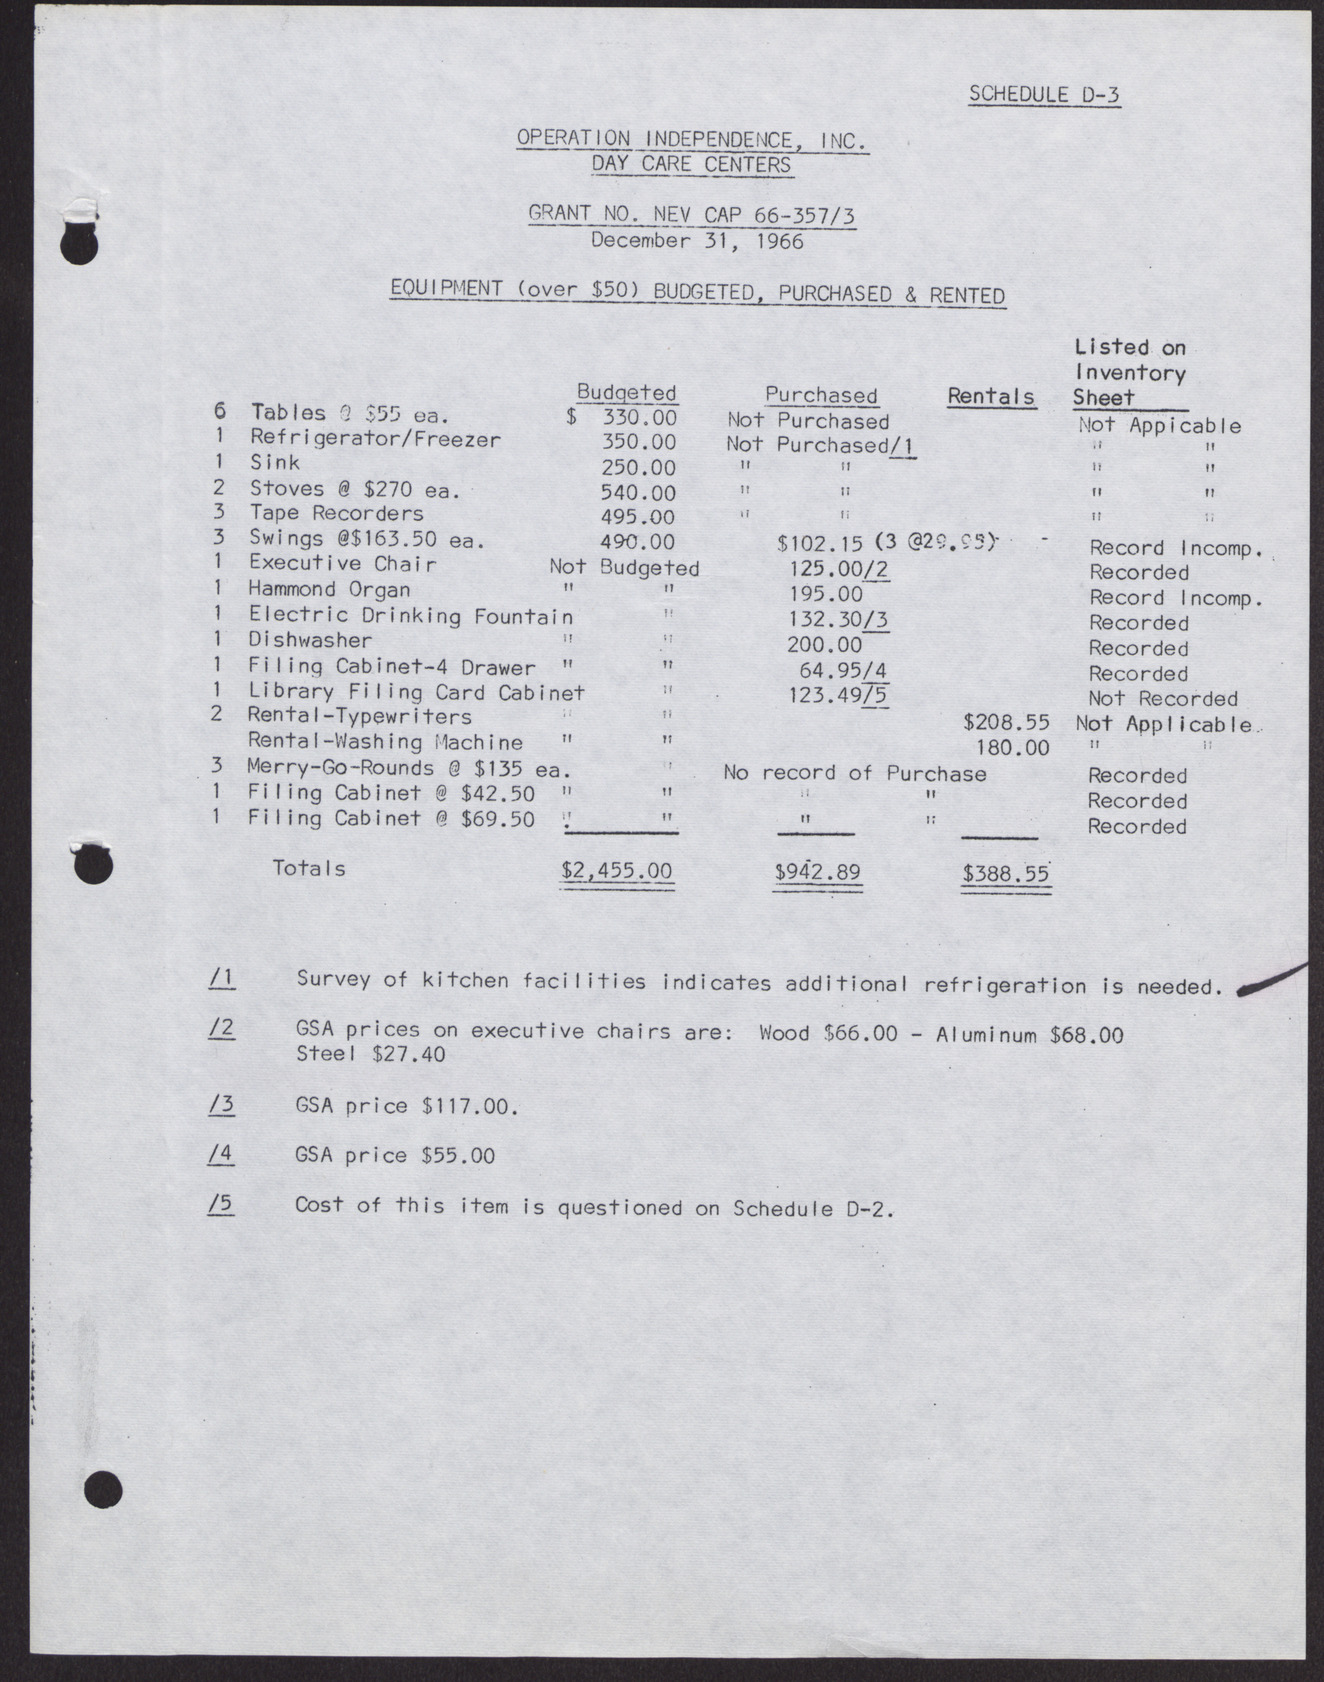 Operation Independence, Inc. Day Care Centers Questioned Costs, December 31, 1966, page 3